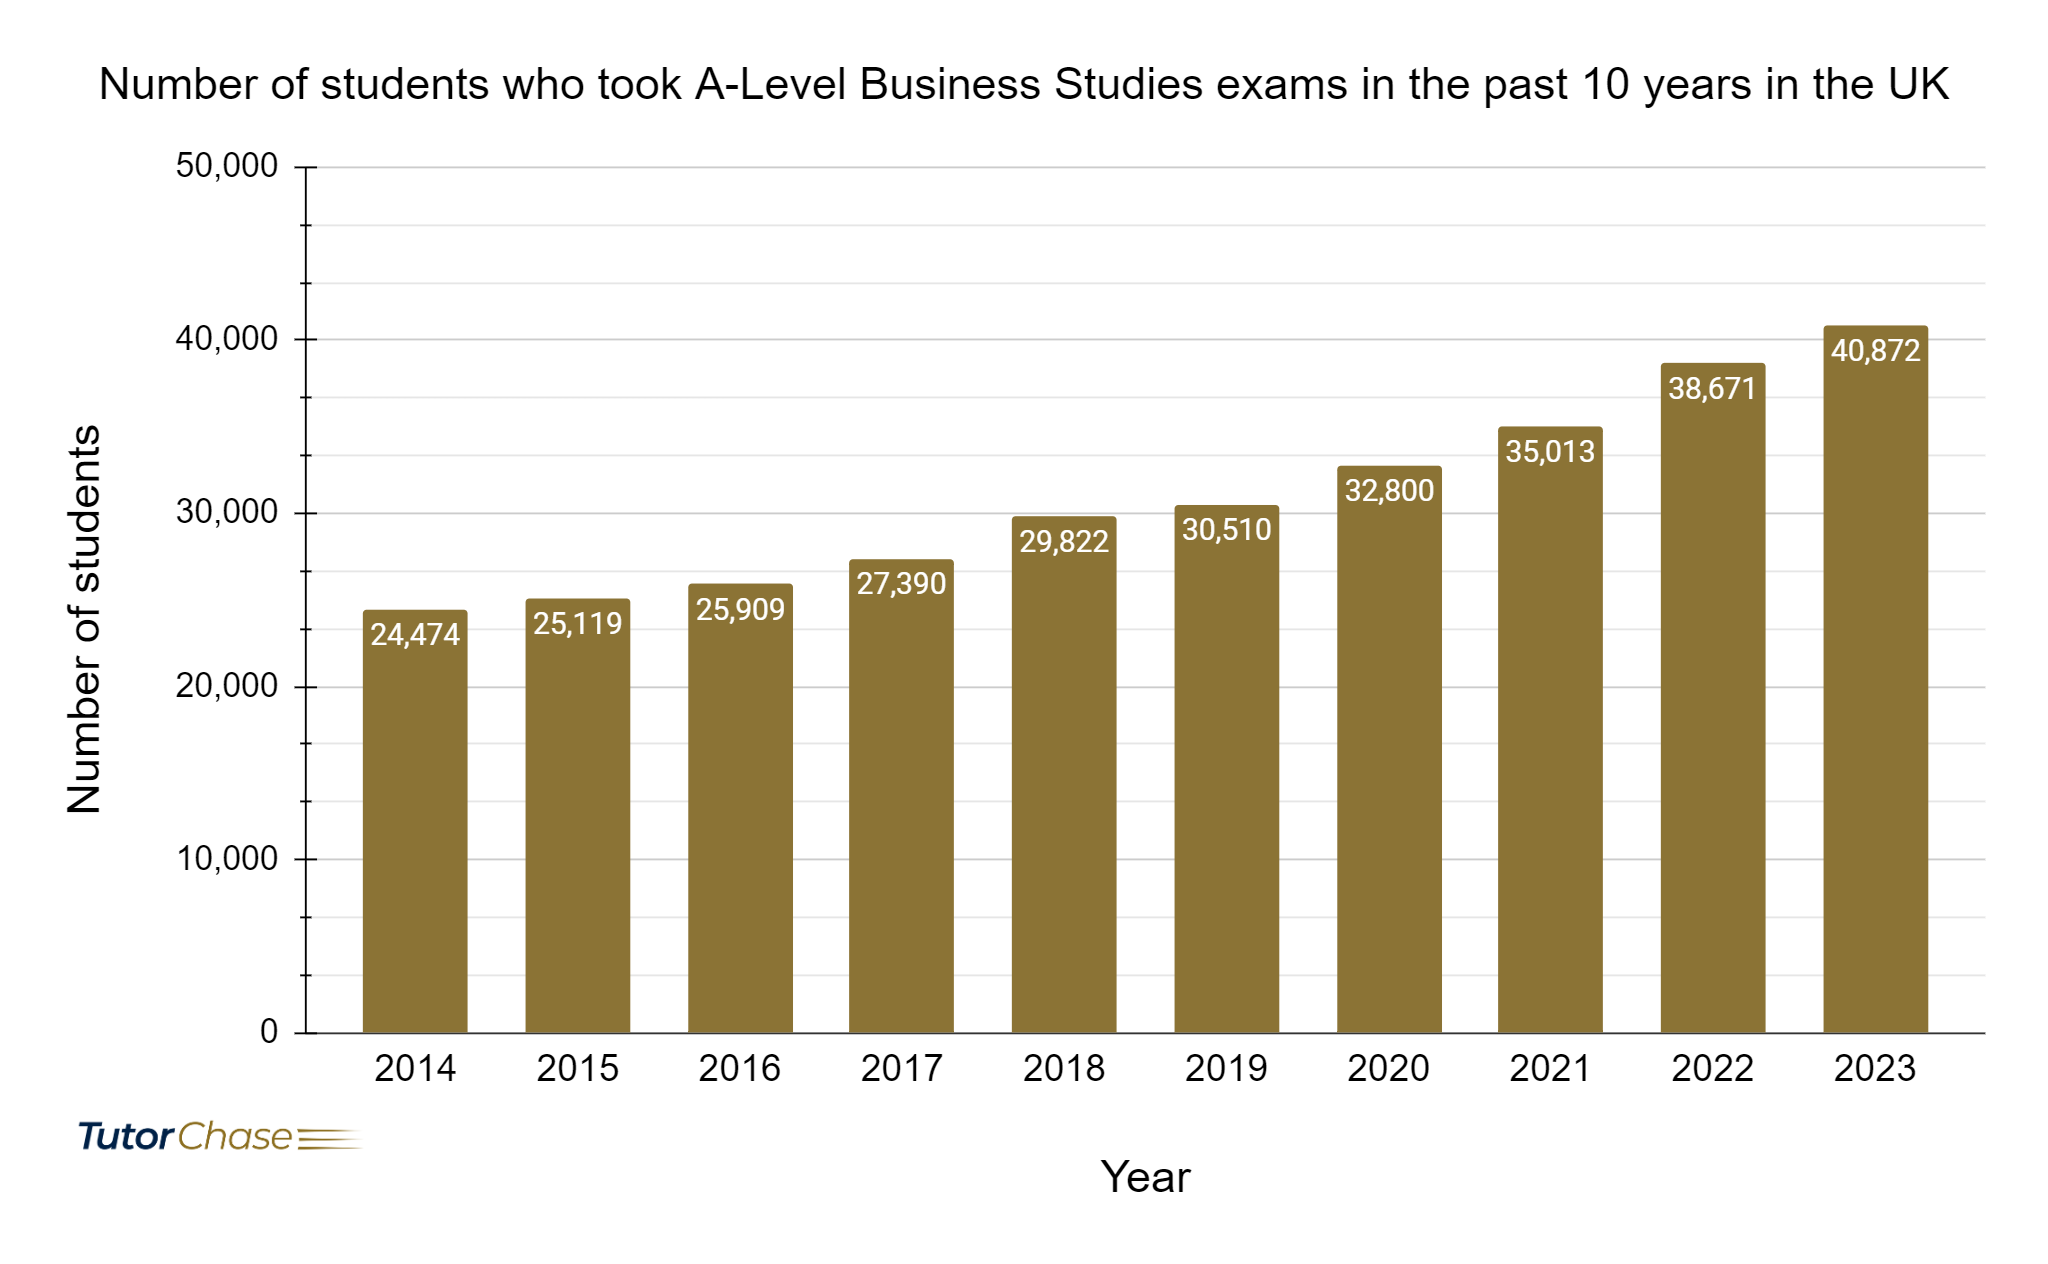 Number of students who took A-Level Business Studies exams in the past 10 years